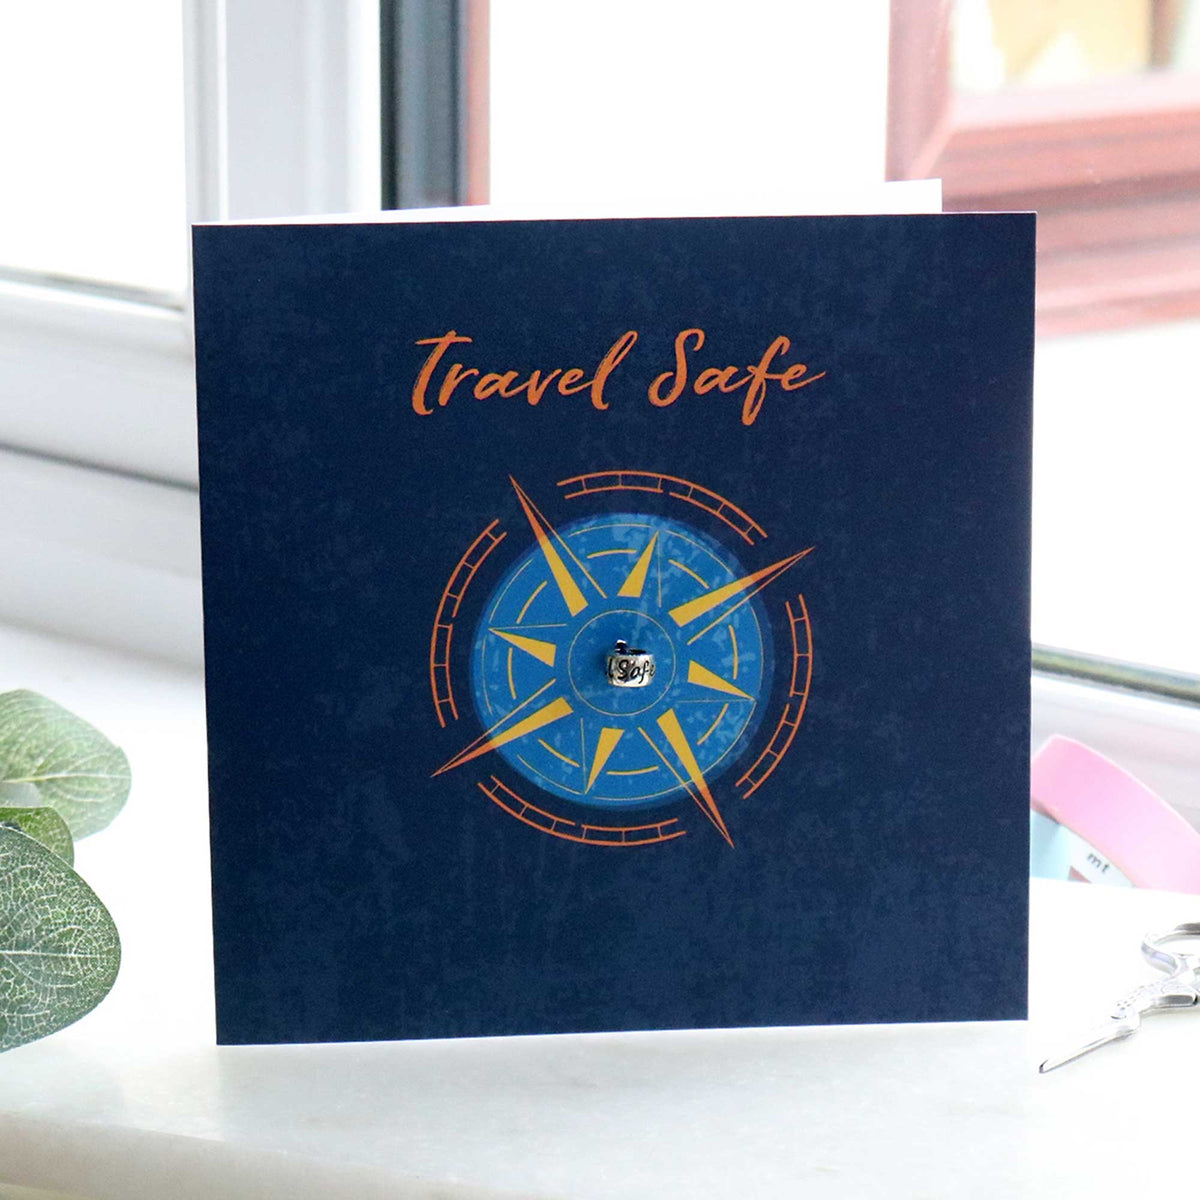 Travel Safe charm bead comes tied to an all-in-one gift card for your world travellers.